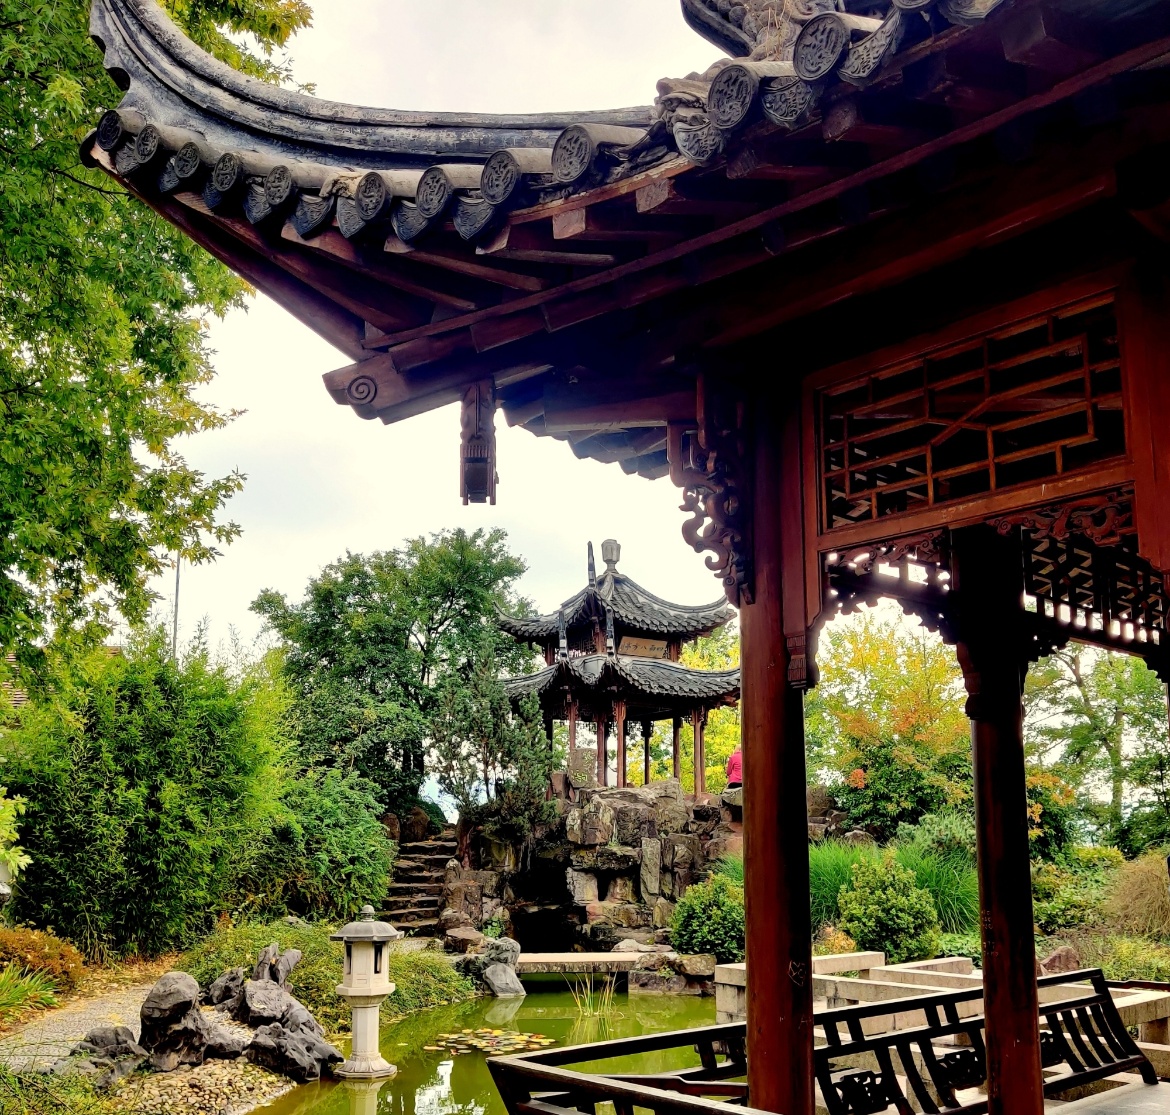 Overview of the Chinese Garden